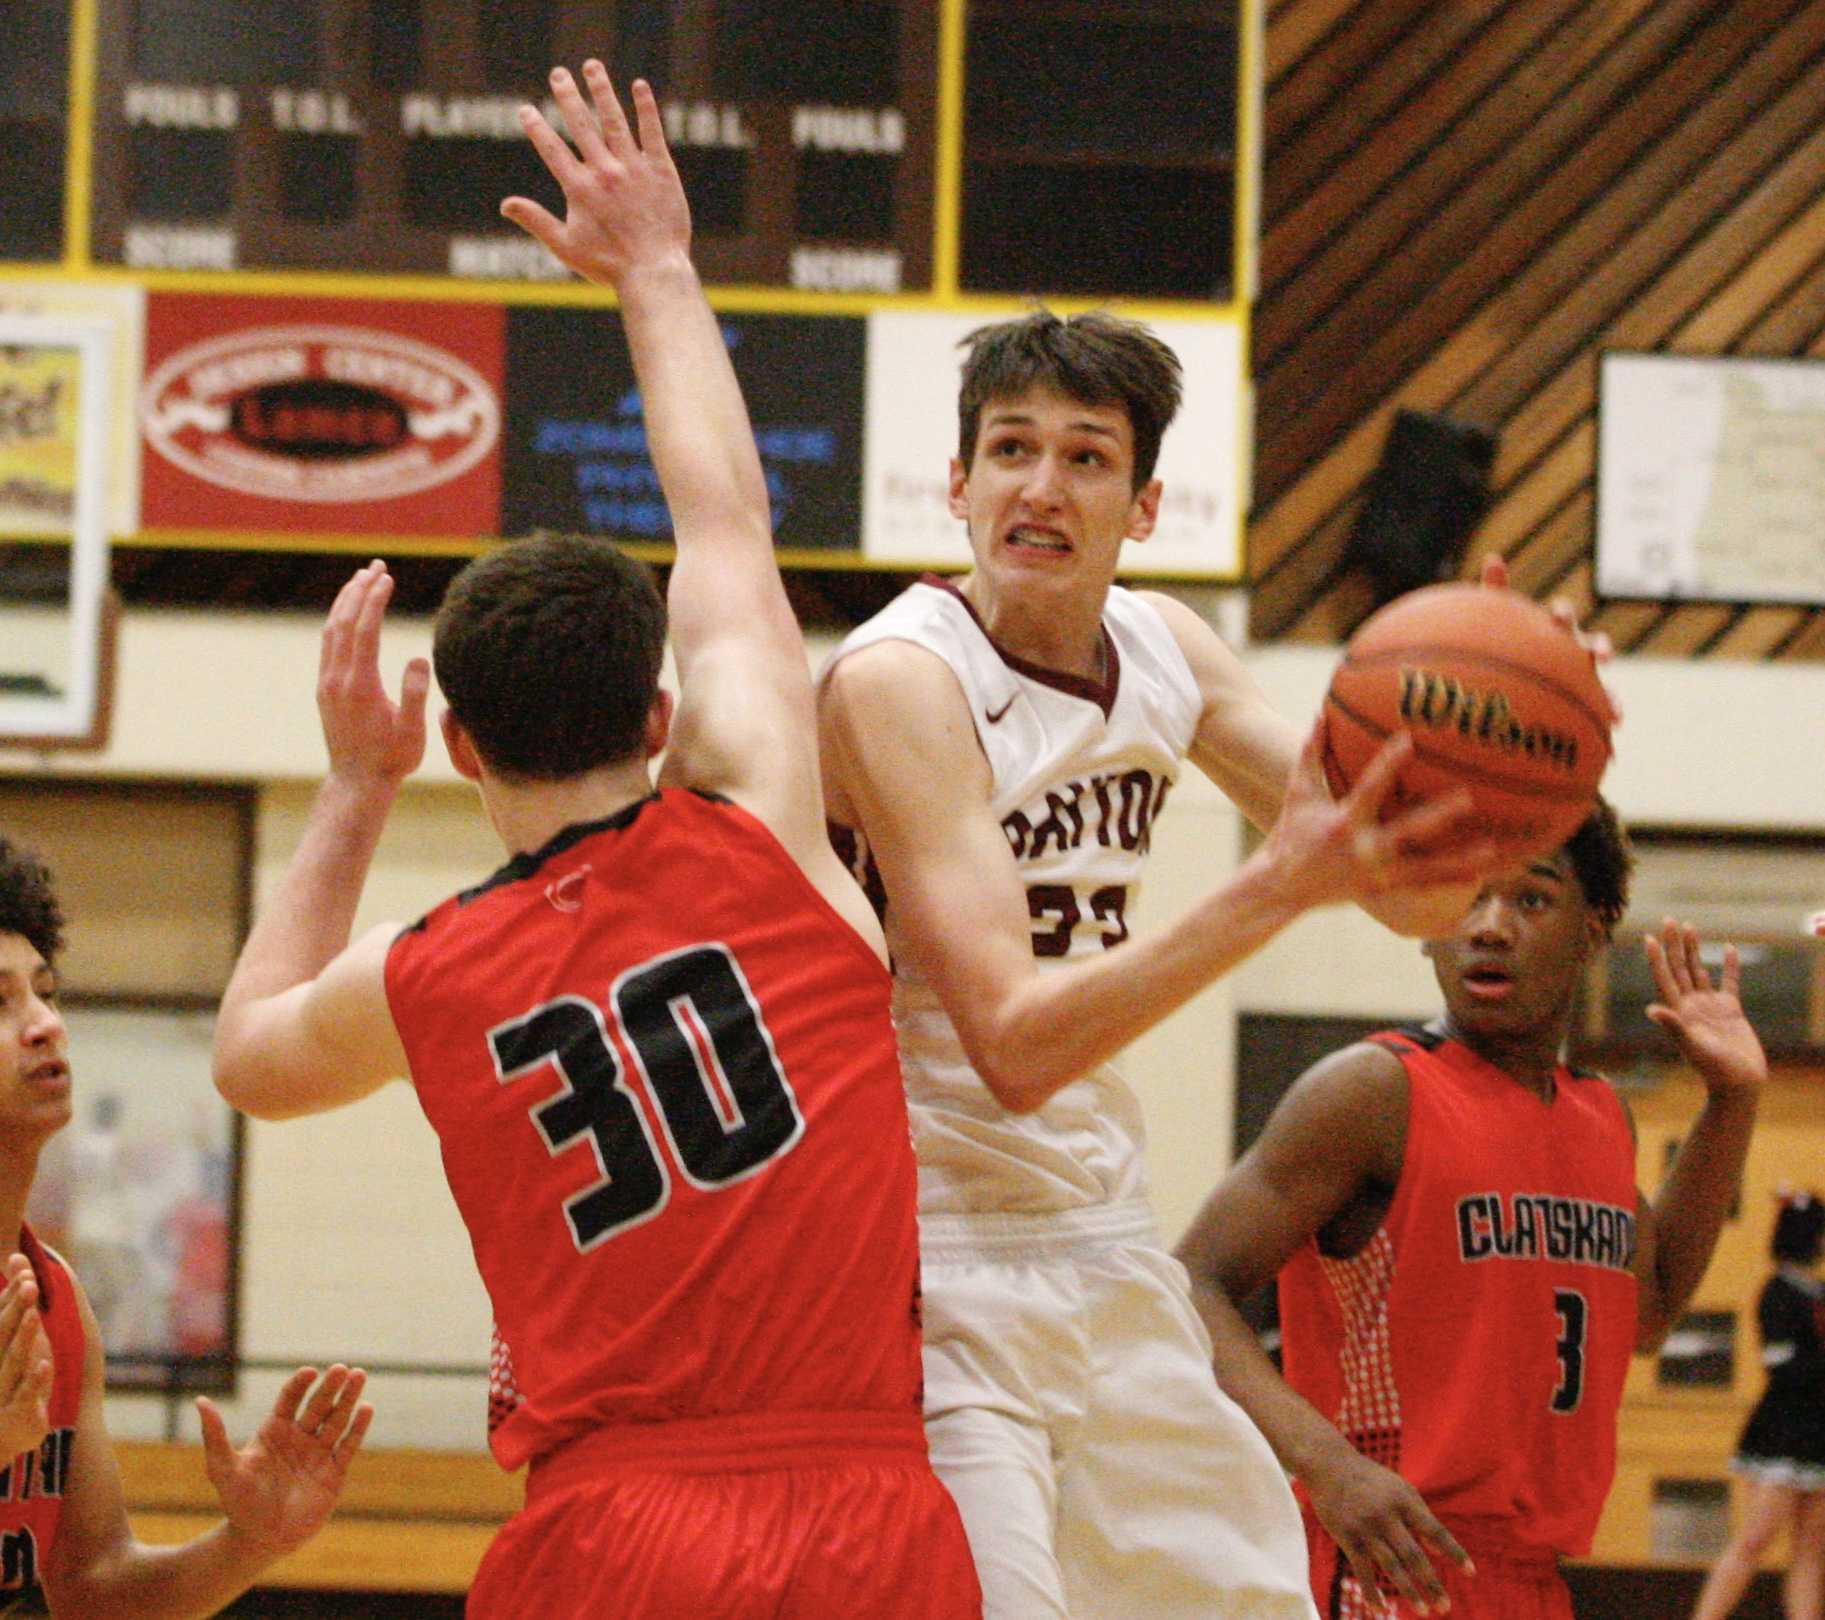 Dayton's Jaysen Howard gets between two Clatskanie defenders for a scoop shot Thursday. (Photo by Norm Maves Jr.)